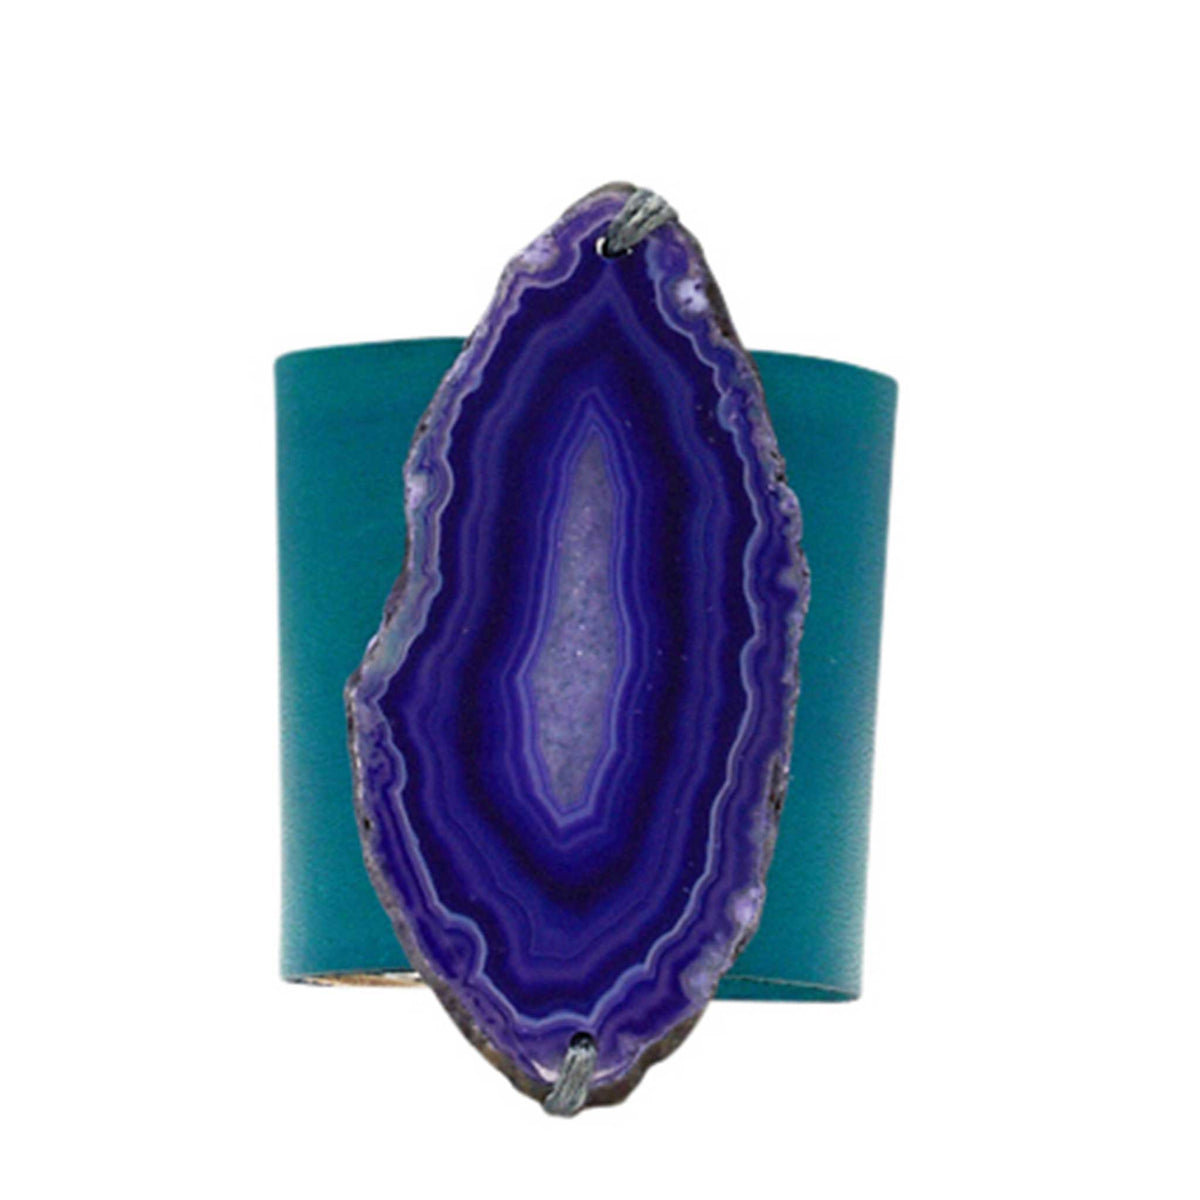 HANDCRAFTED CUFF - TEAL LEATHER WITH PURPLE AGATE - 6CMTEPU1.1